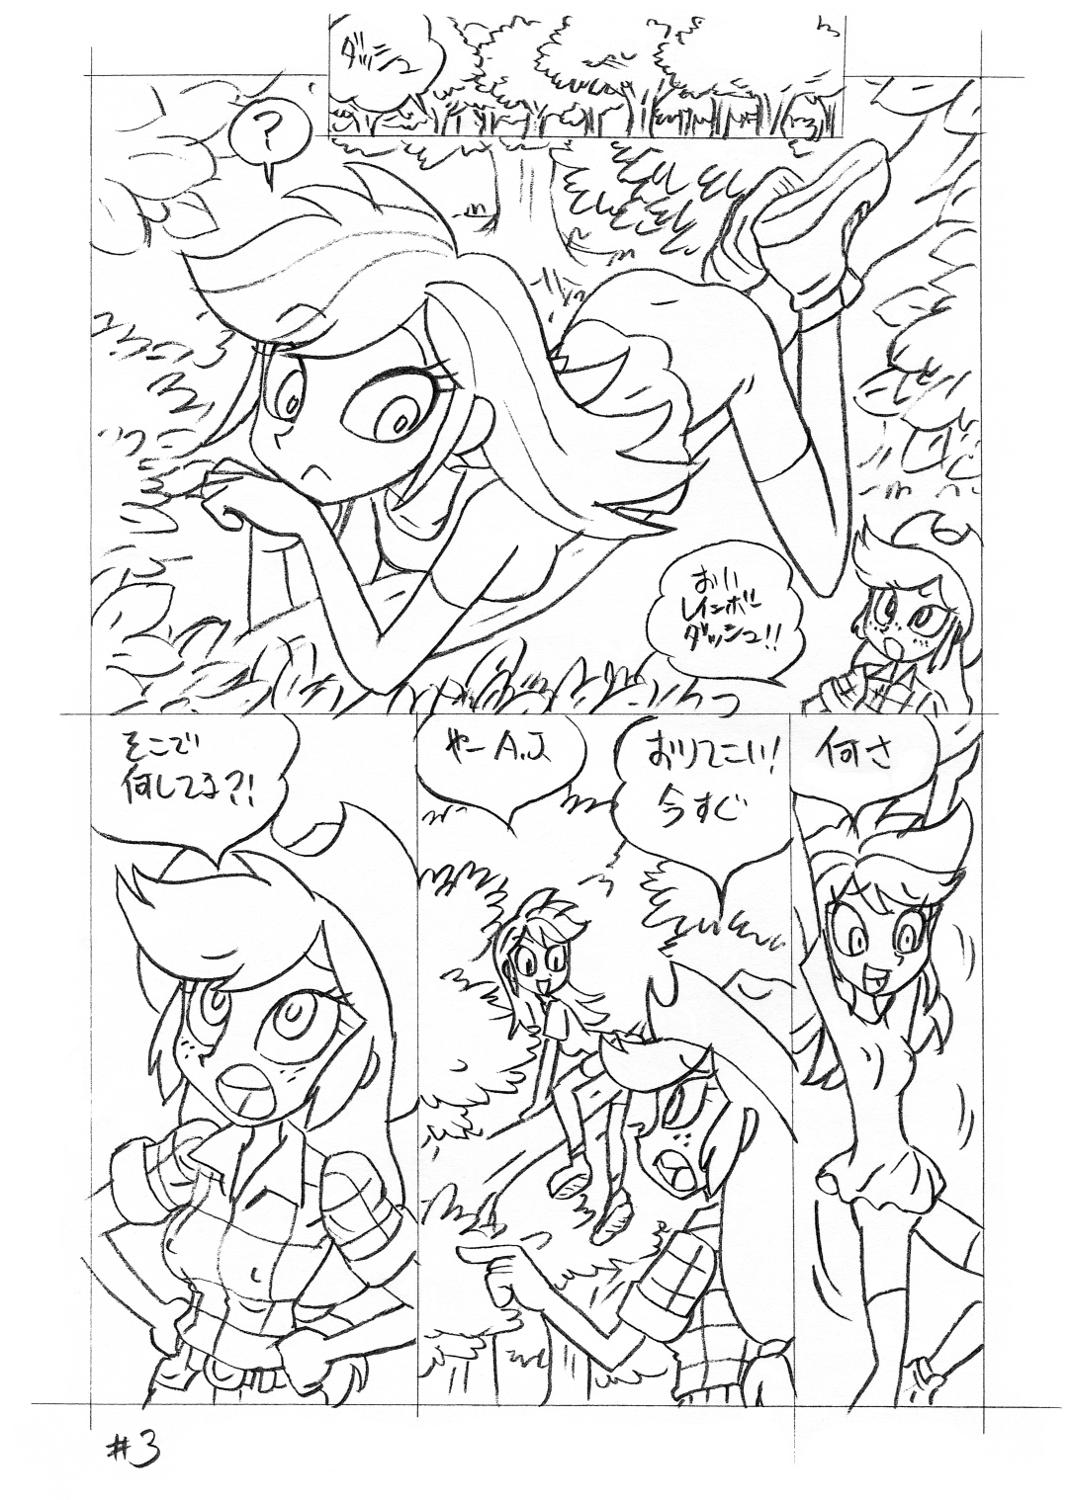 Bucetinha Psychosomatic Counterfeit EX- A.J. in E.G. Style - My little pony friendship is magic Sapphic - Page 2